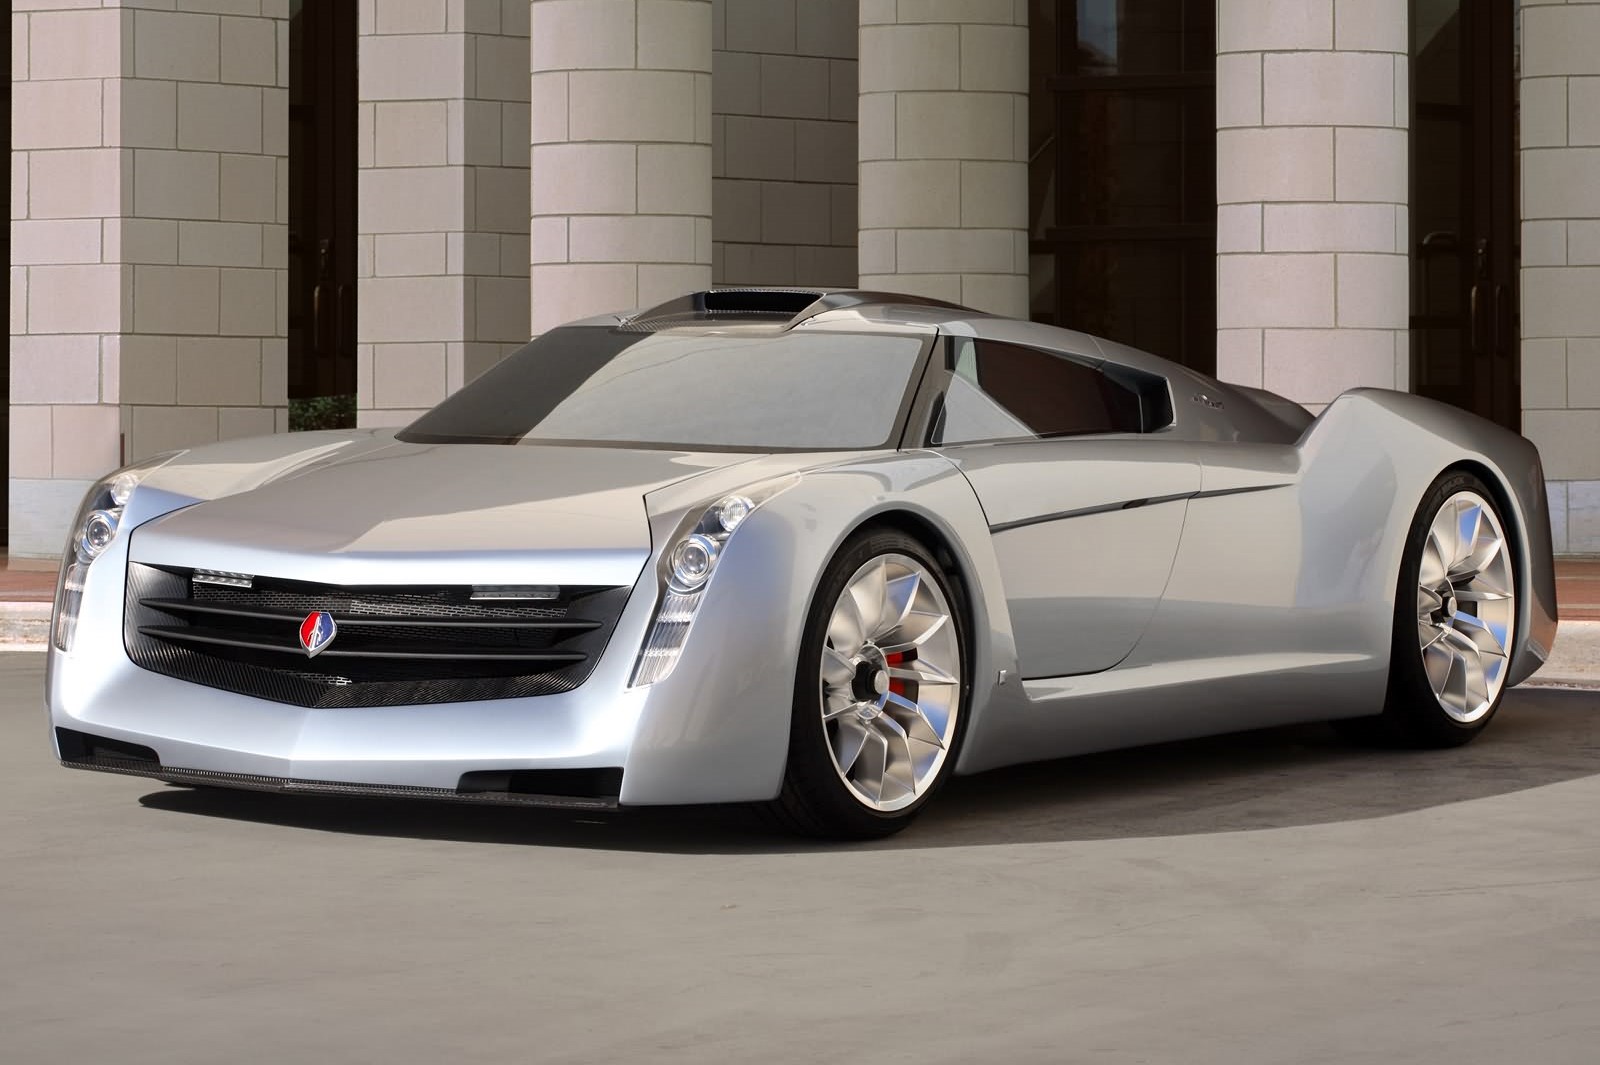 Front-angled shot of the silver GM Ecojet concept supercar.